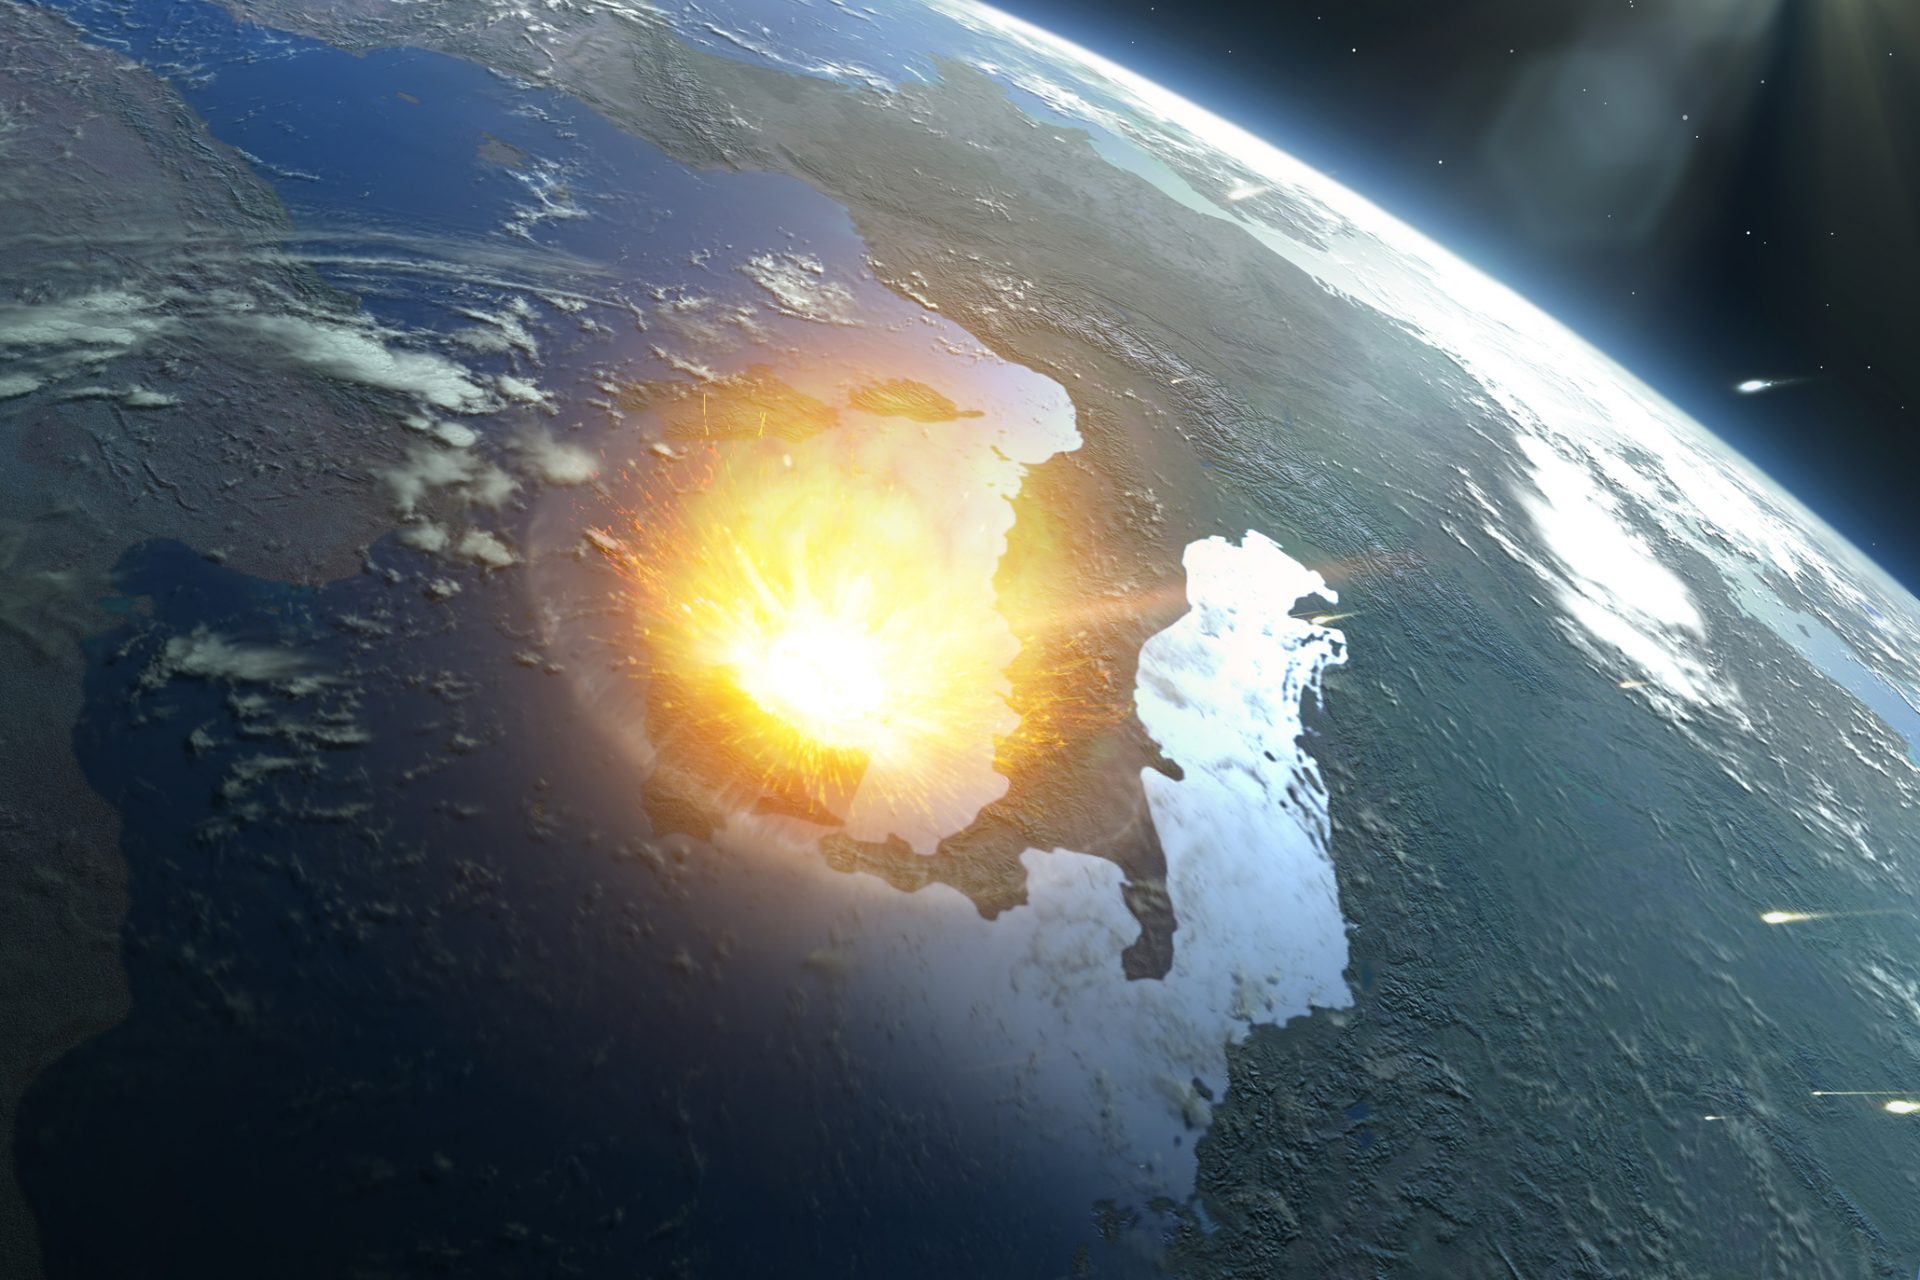 An asteroid flew dangerously close to the Earth and we didn't even know it